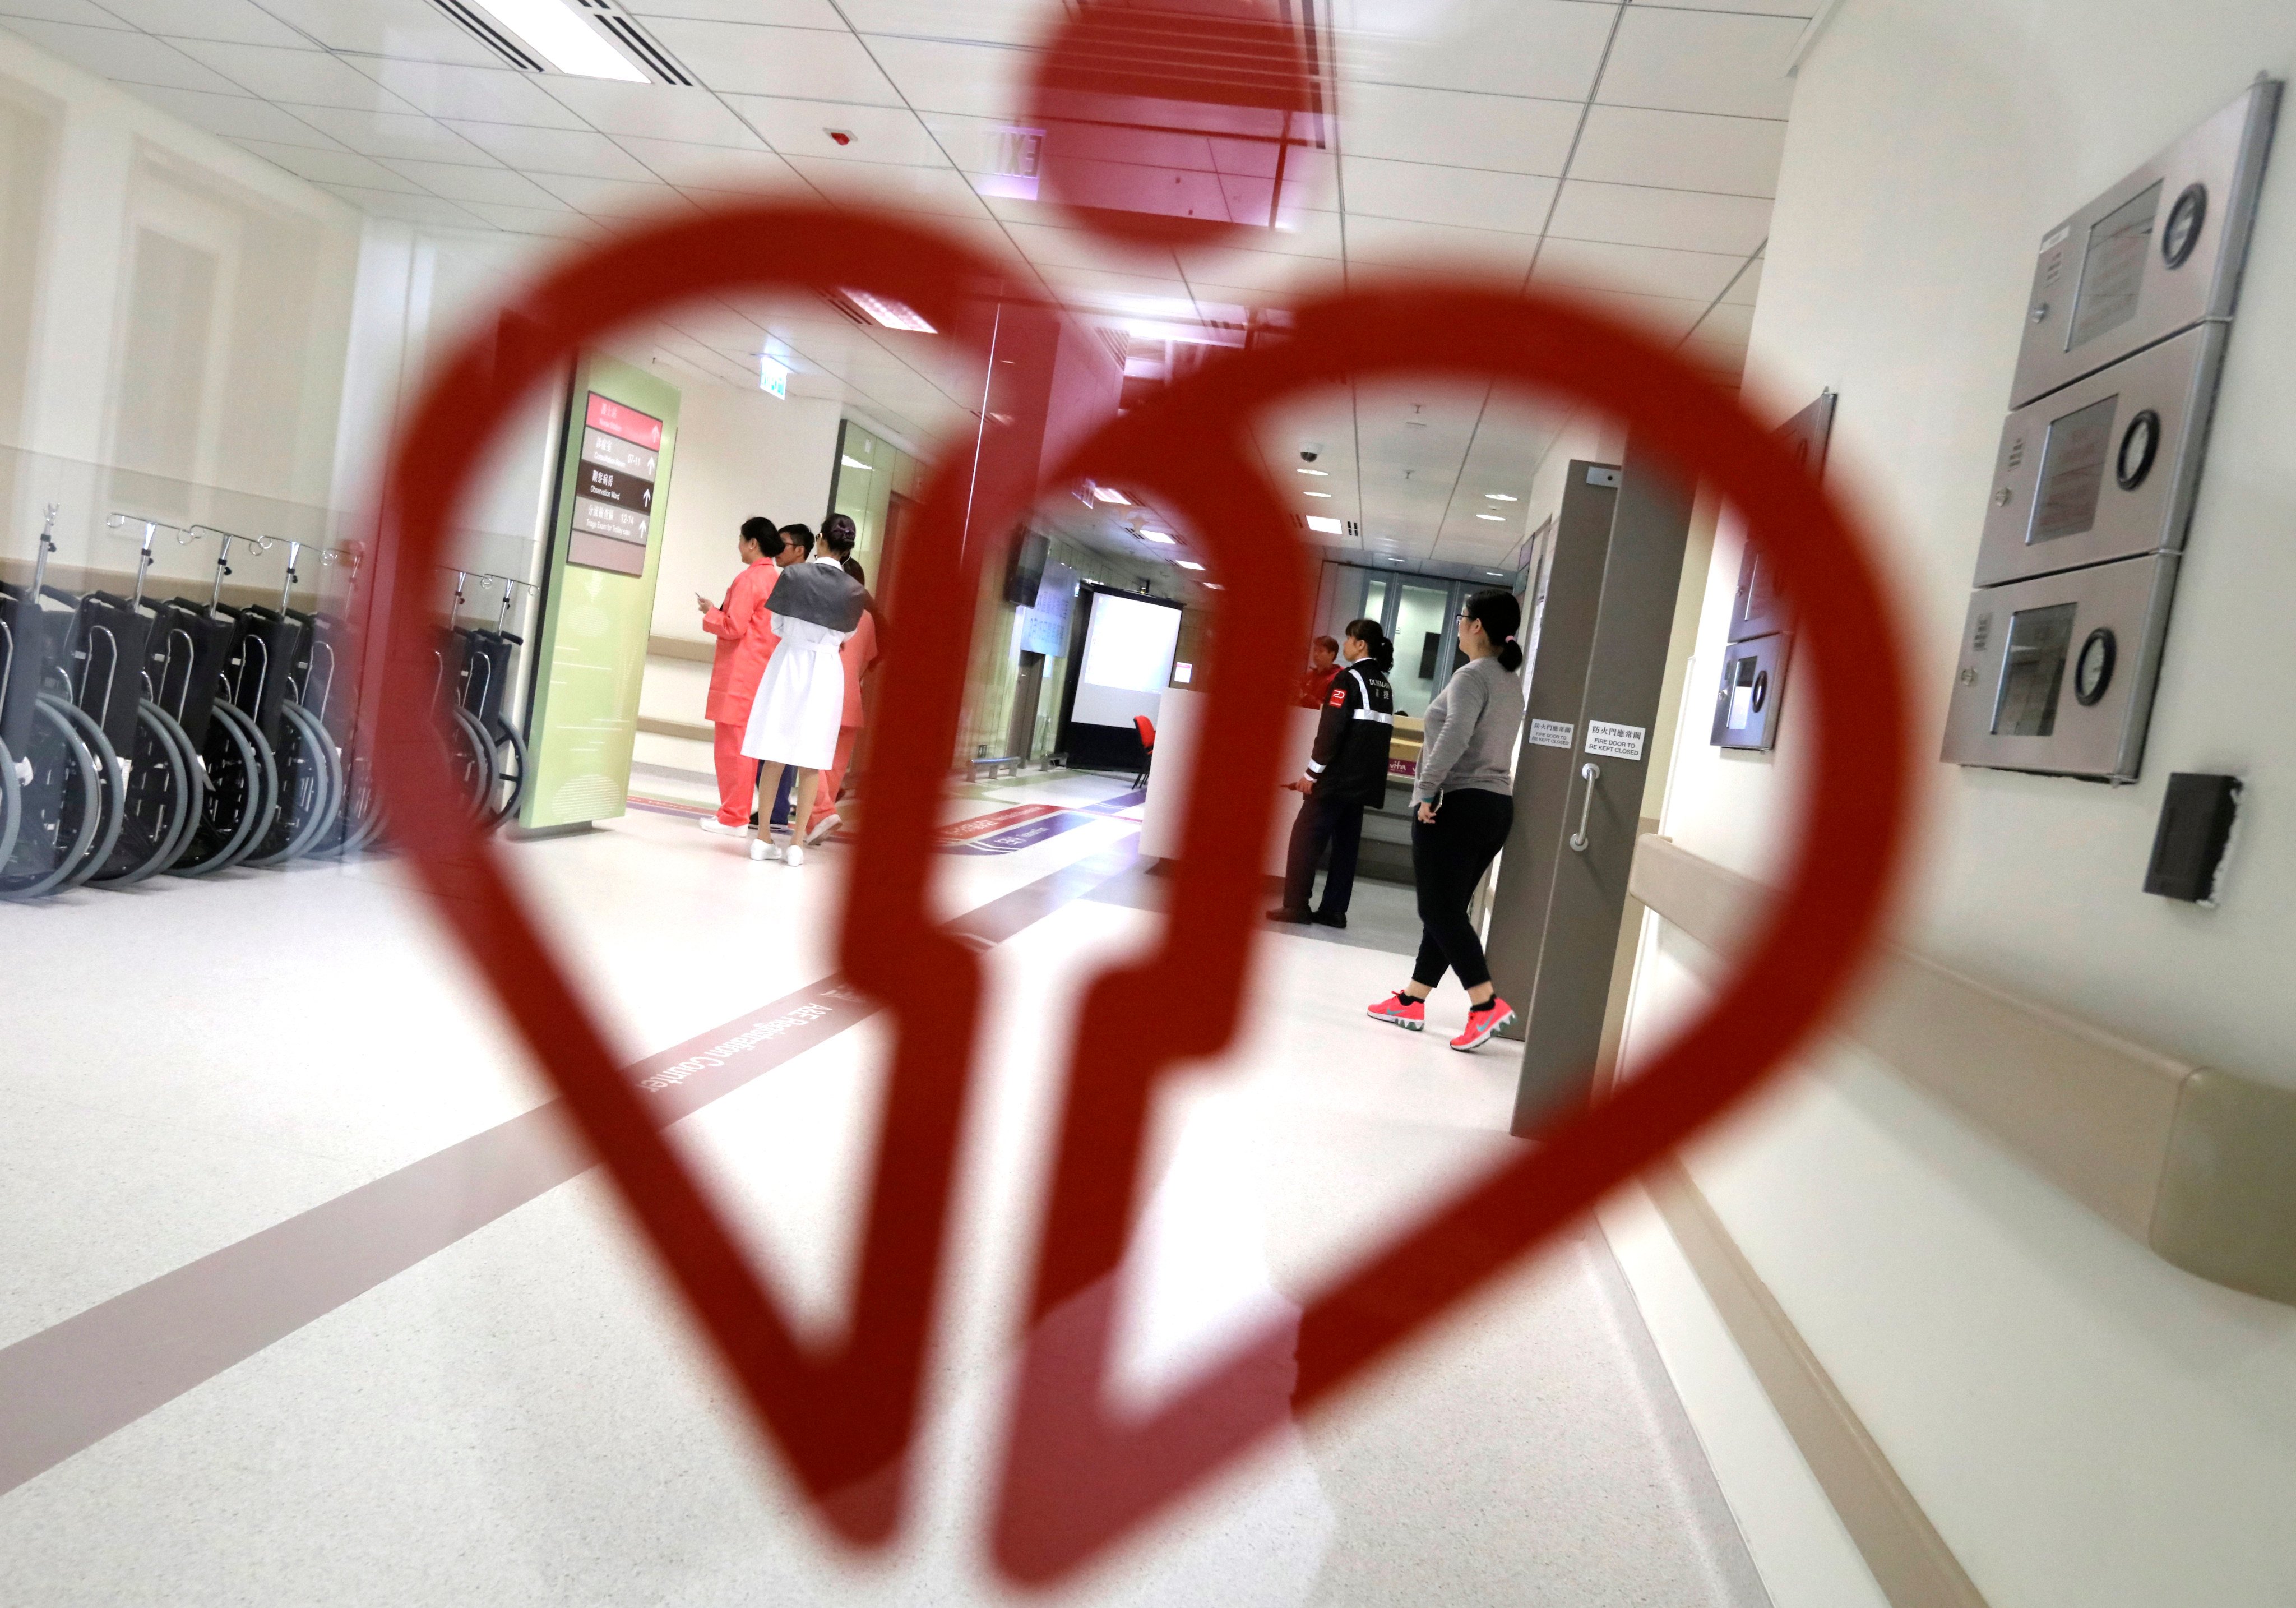 Hong Kong’s public health sector is grappling with a personnel shortage. Photo: Felix Wong